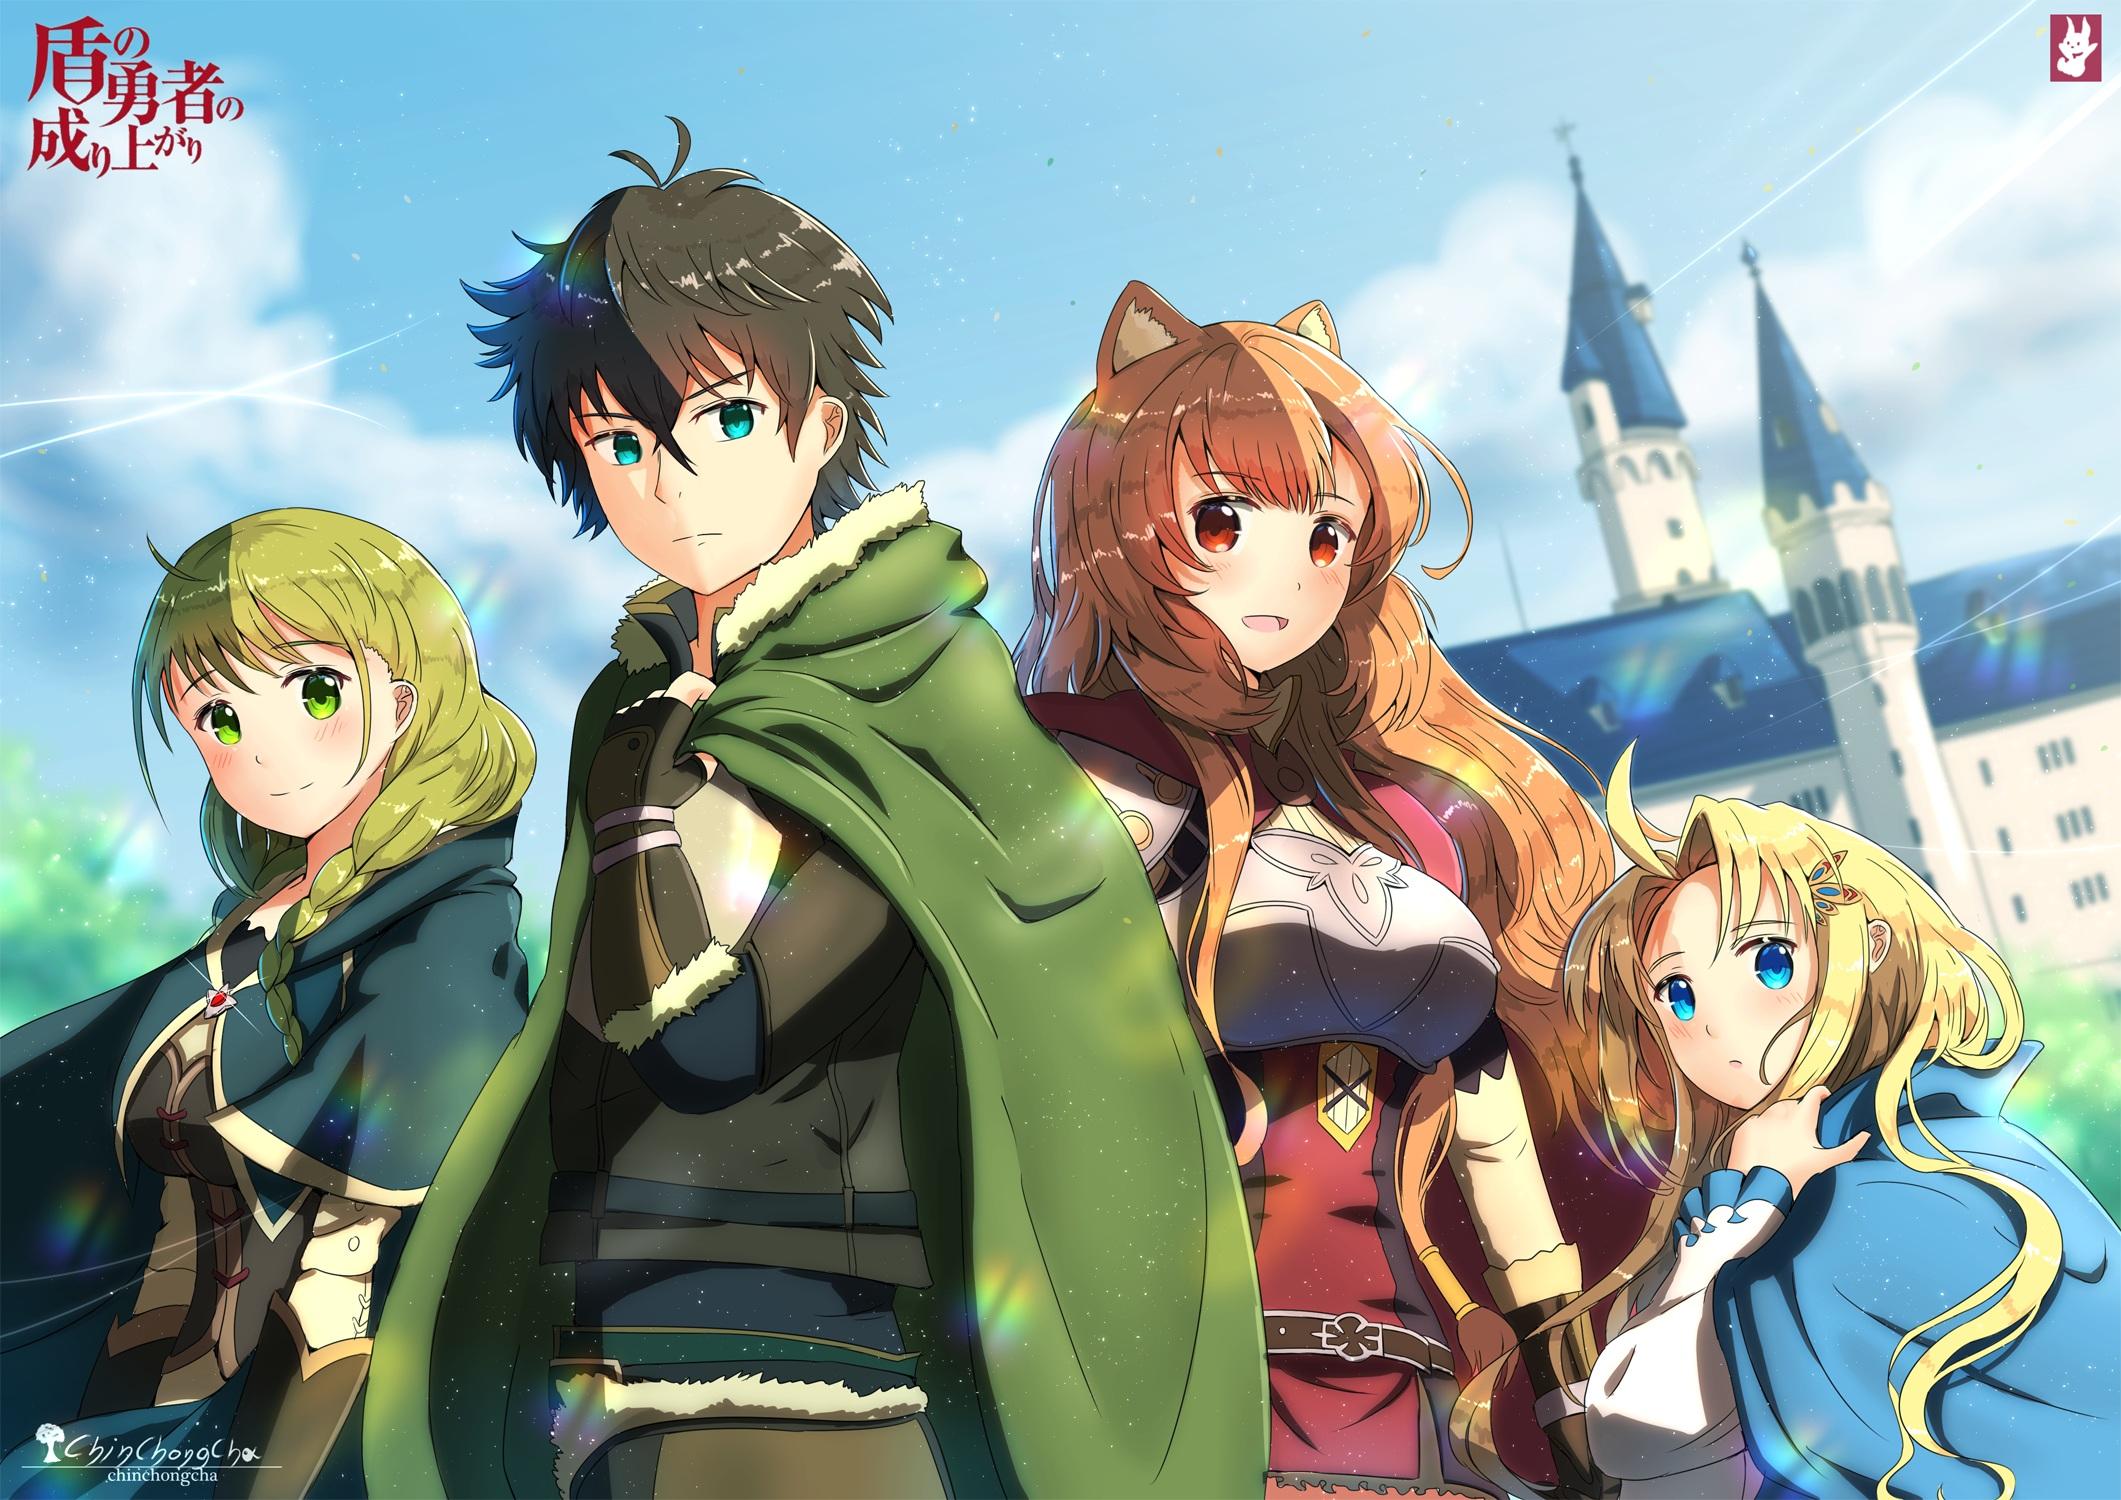 The Rising of the Shield Hero Wallpaper Free The Rising